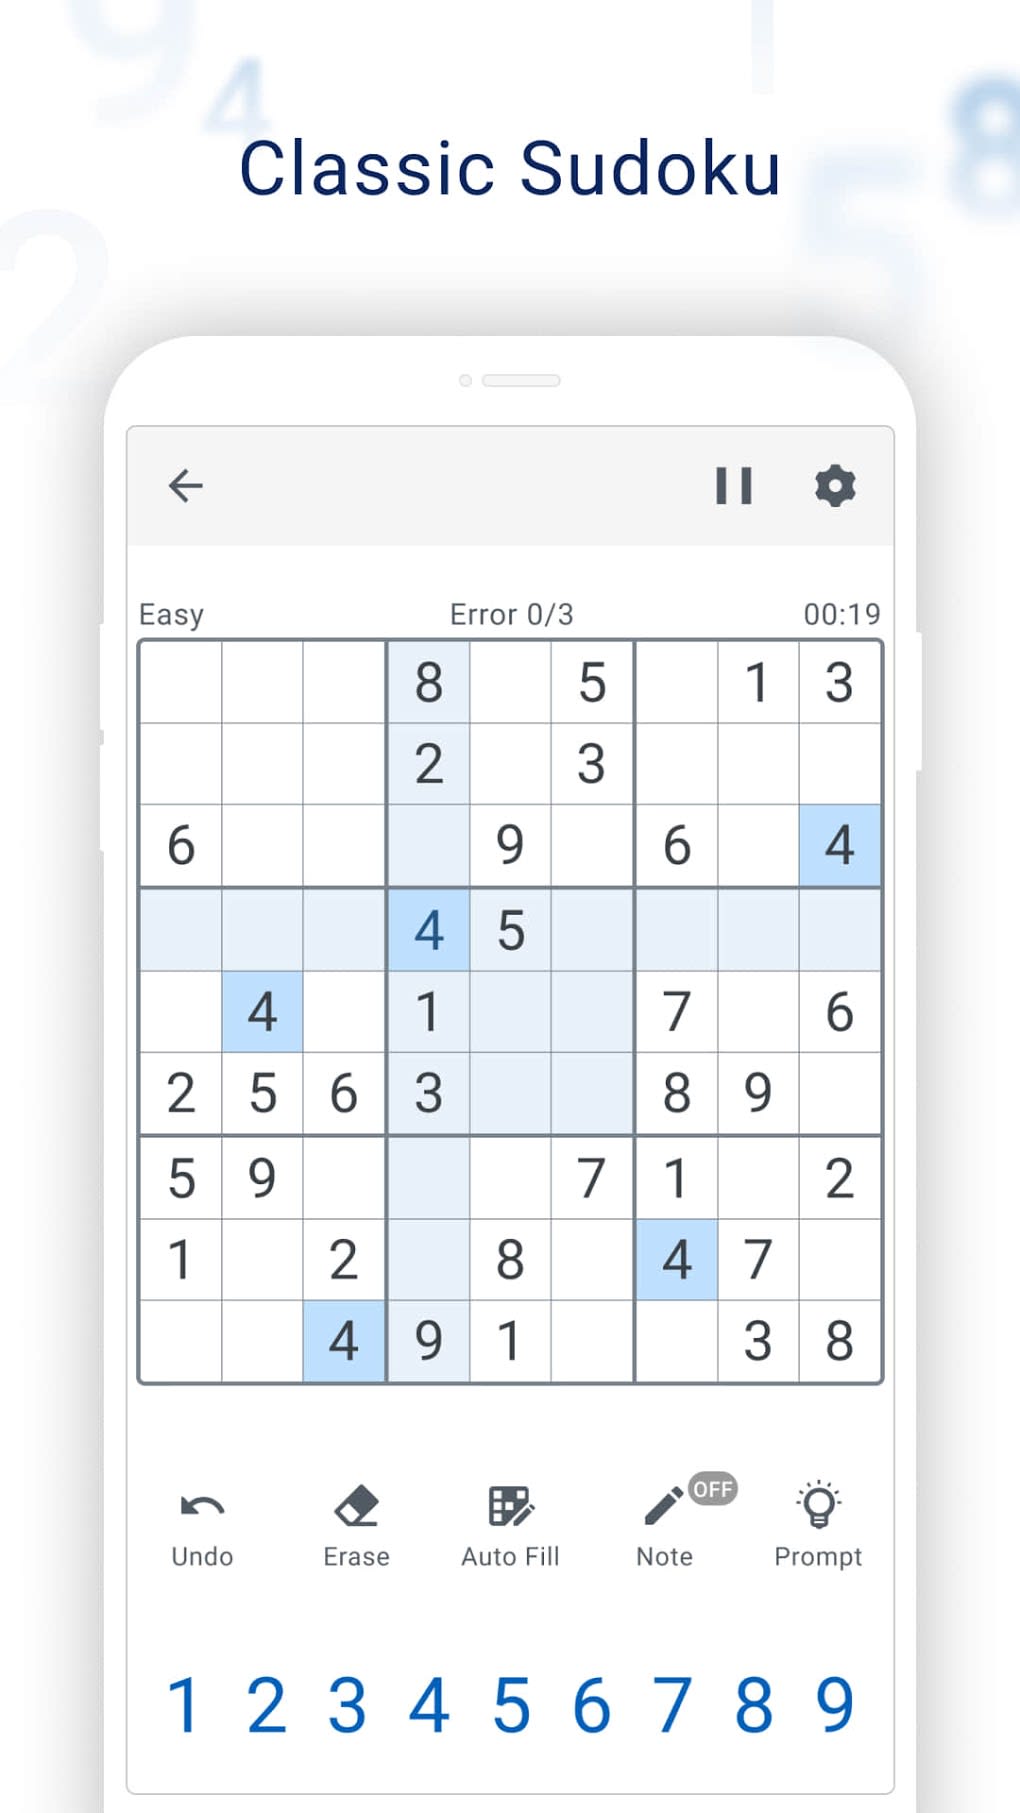 If Candy Crush and Sudoku Had a Baby, It Would Look Like 2048